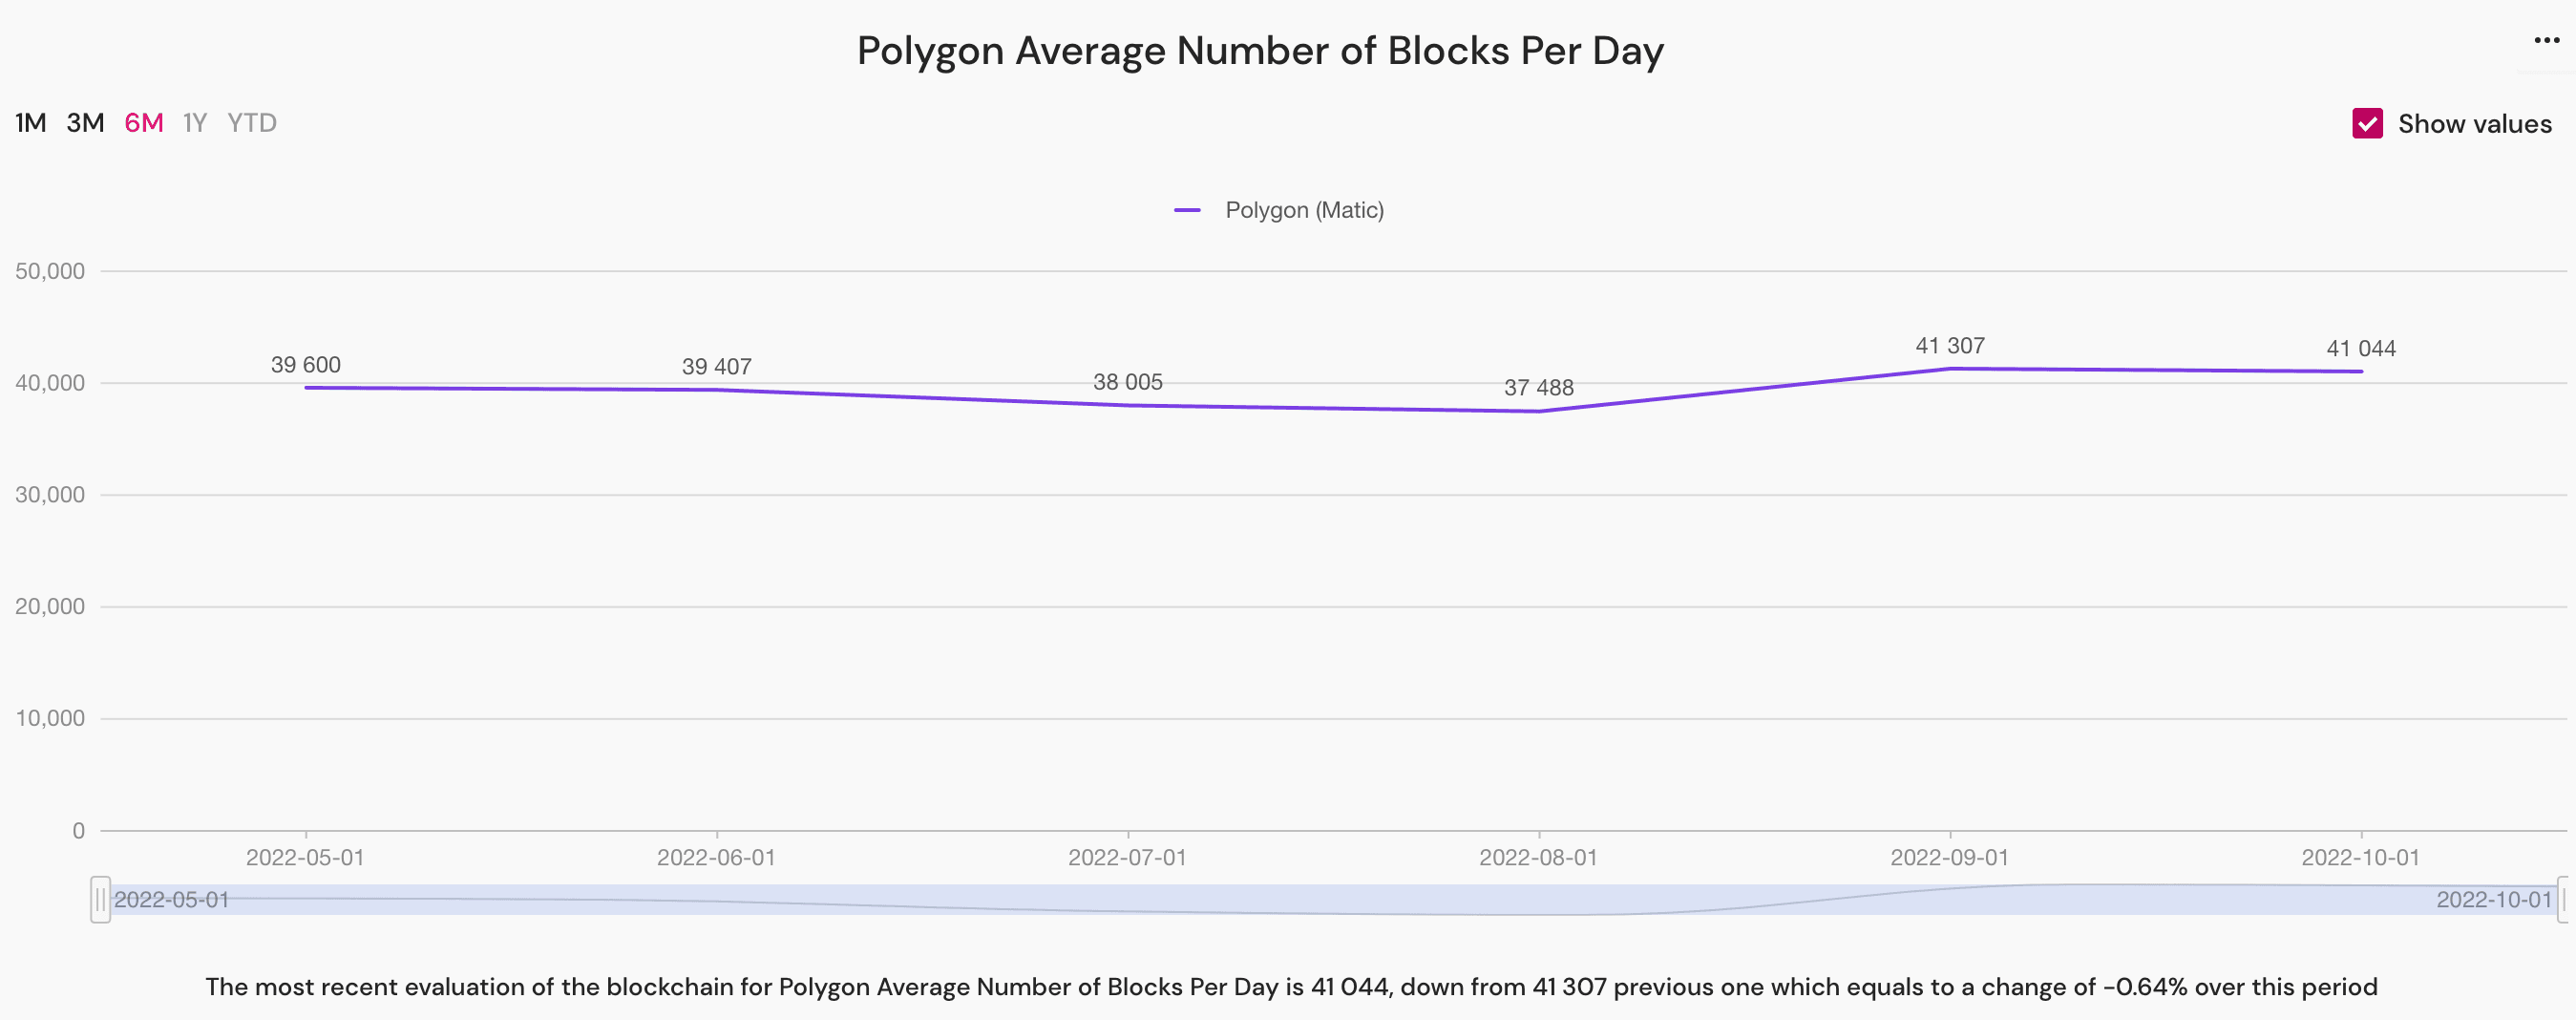 polygon average number of blocks per day in October 2022